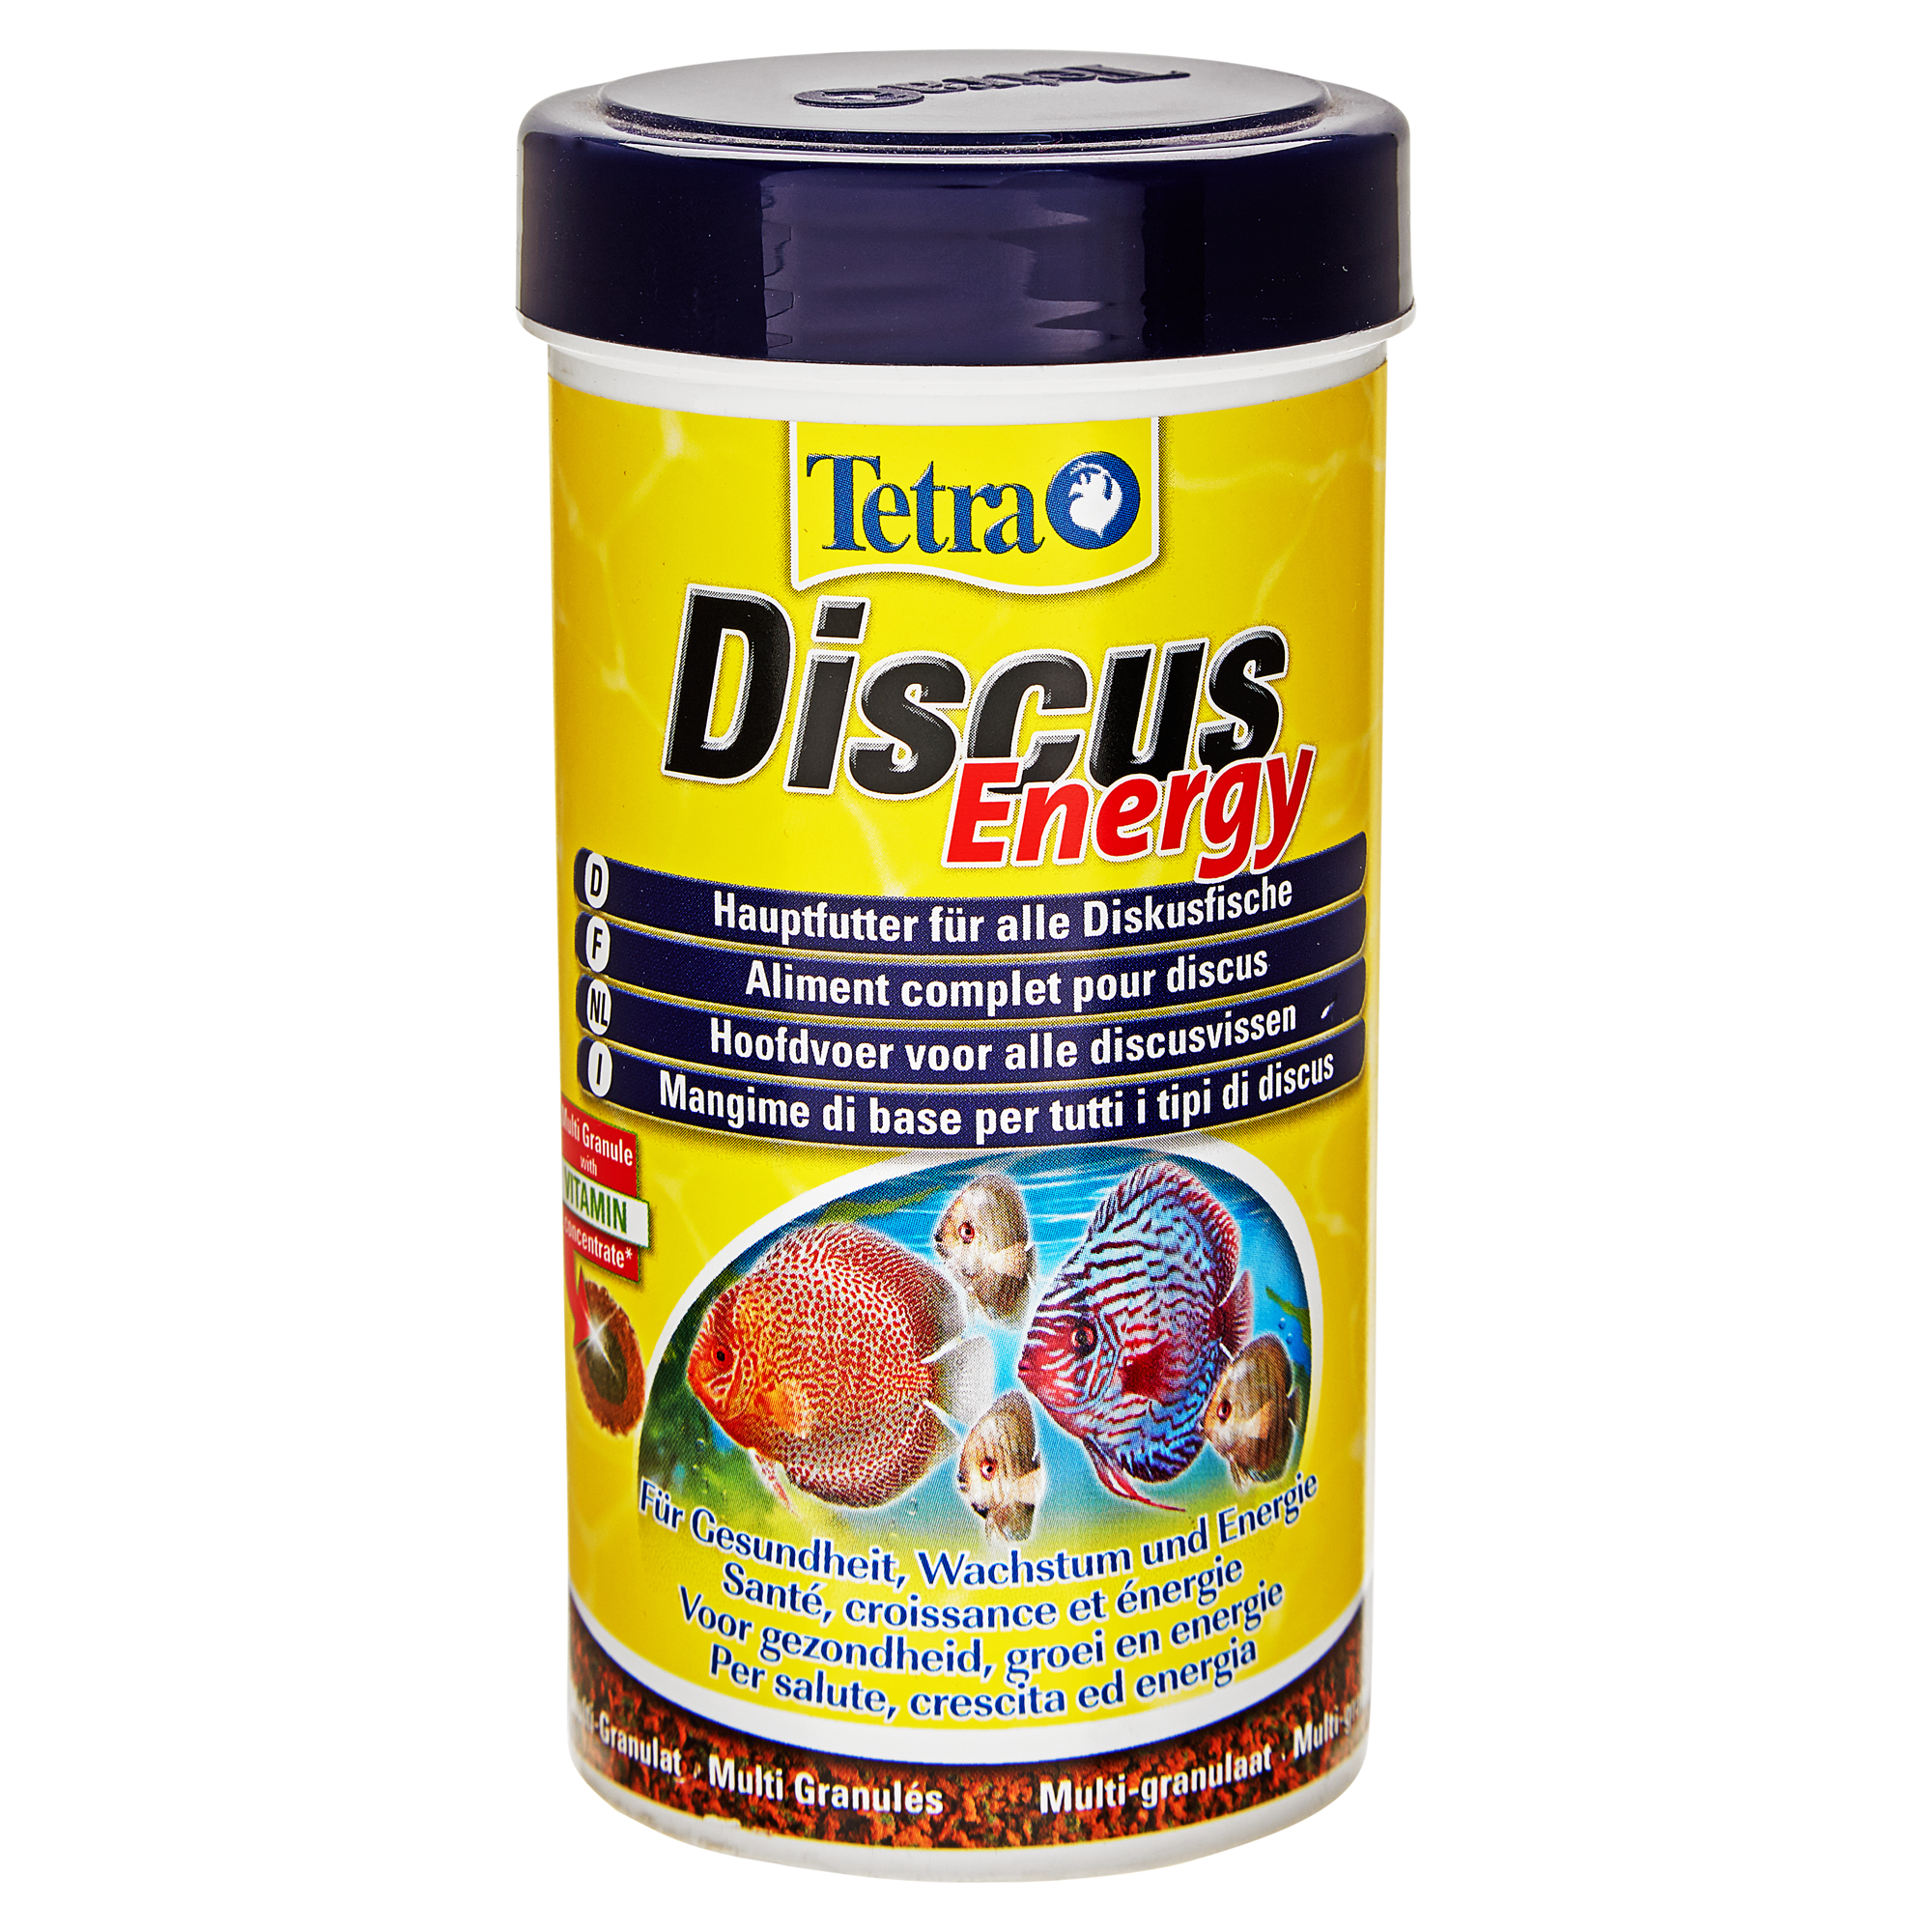 Fischfutter "Discus" Energy 80 g + product picture